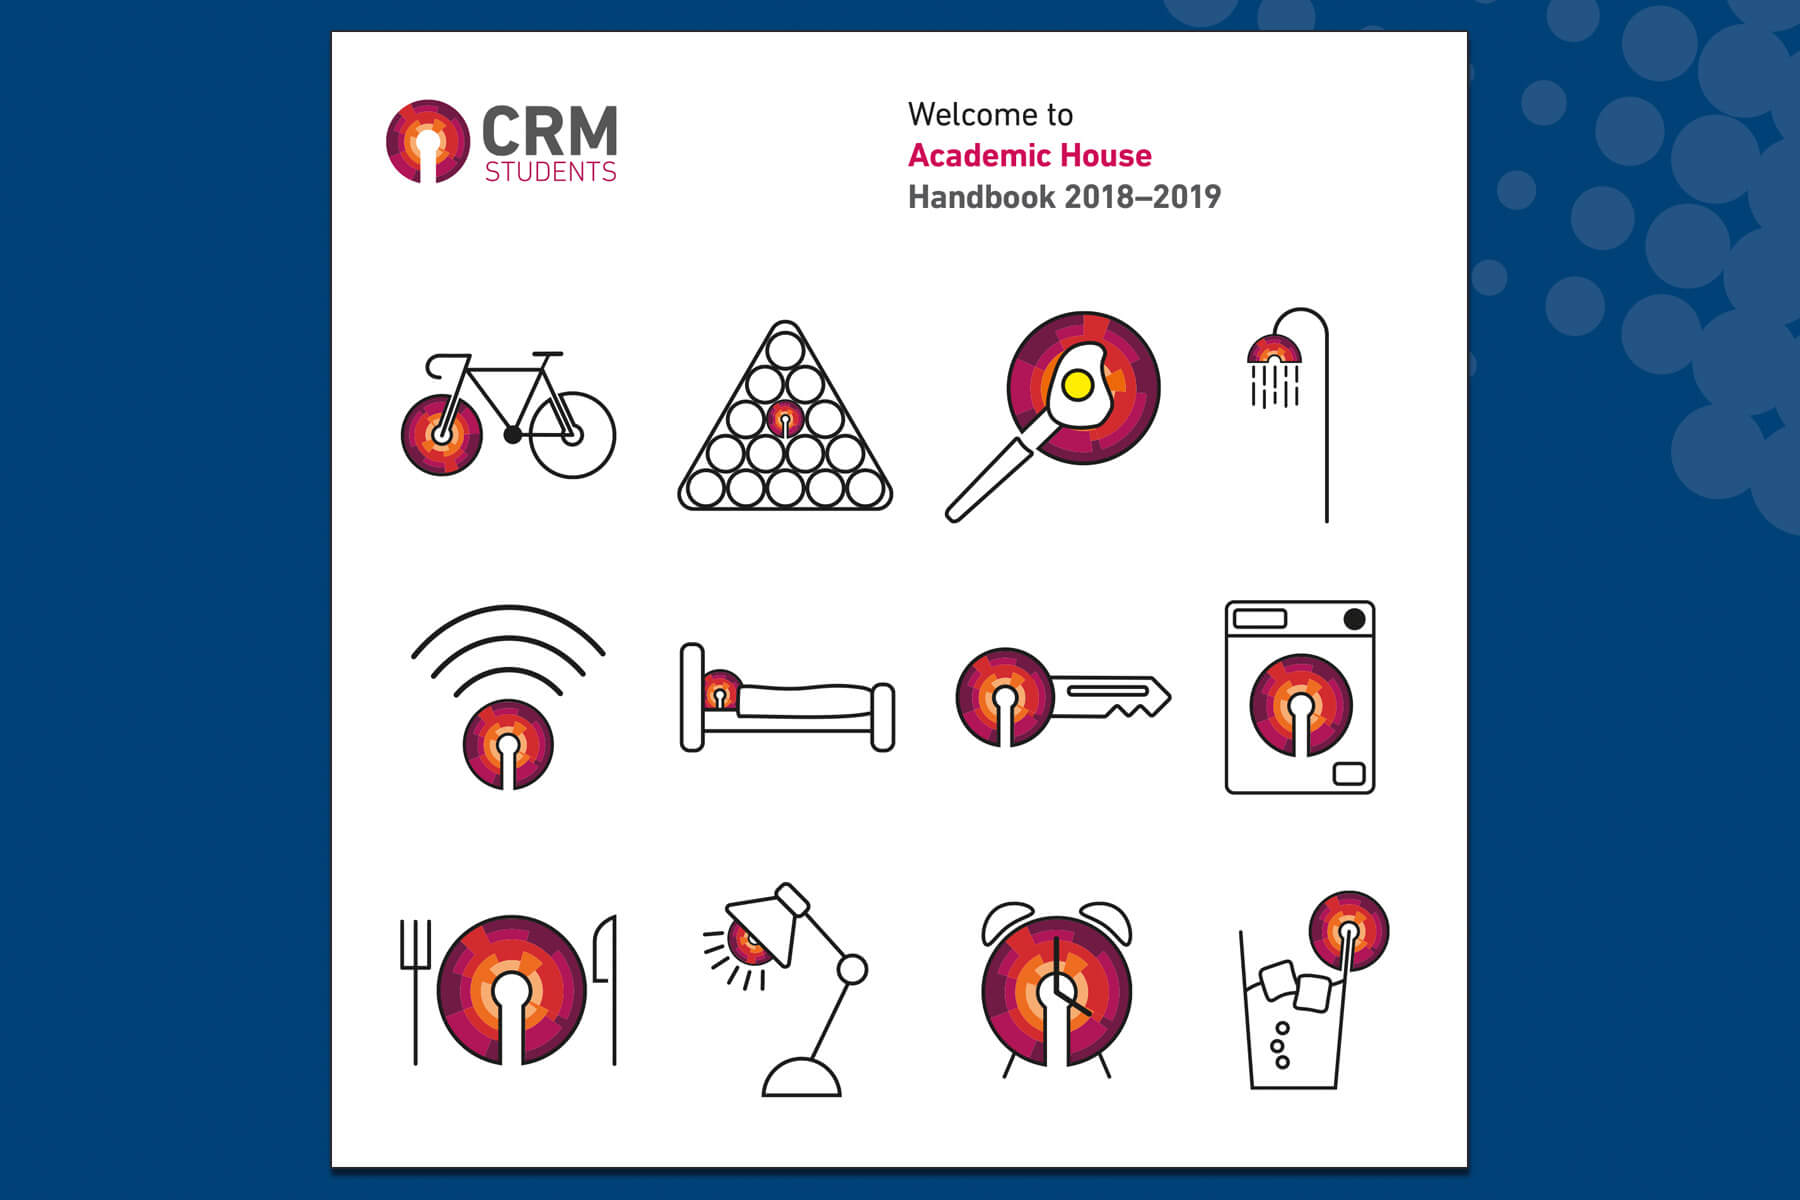 <div class="overlay" style="background-image: url('/Portals/_default/Skins/HolyWellPress/Thumbnail-Corner-Dots.svg')">
<div class="overlaytext">
<h2>campaign creative<br />
and icon design</h2>

<h3>CRM Students</h3>
</div>
</div>
